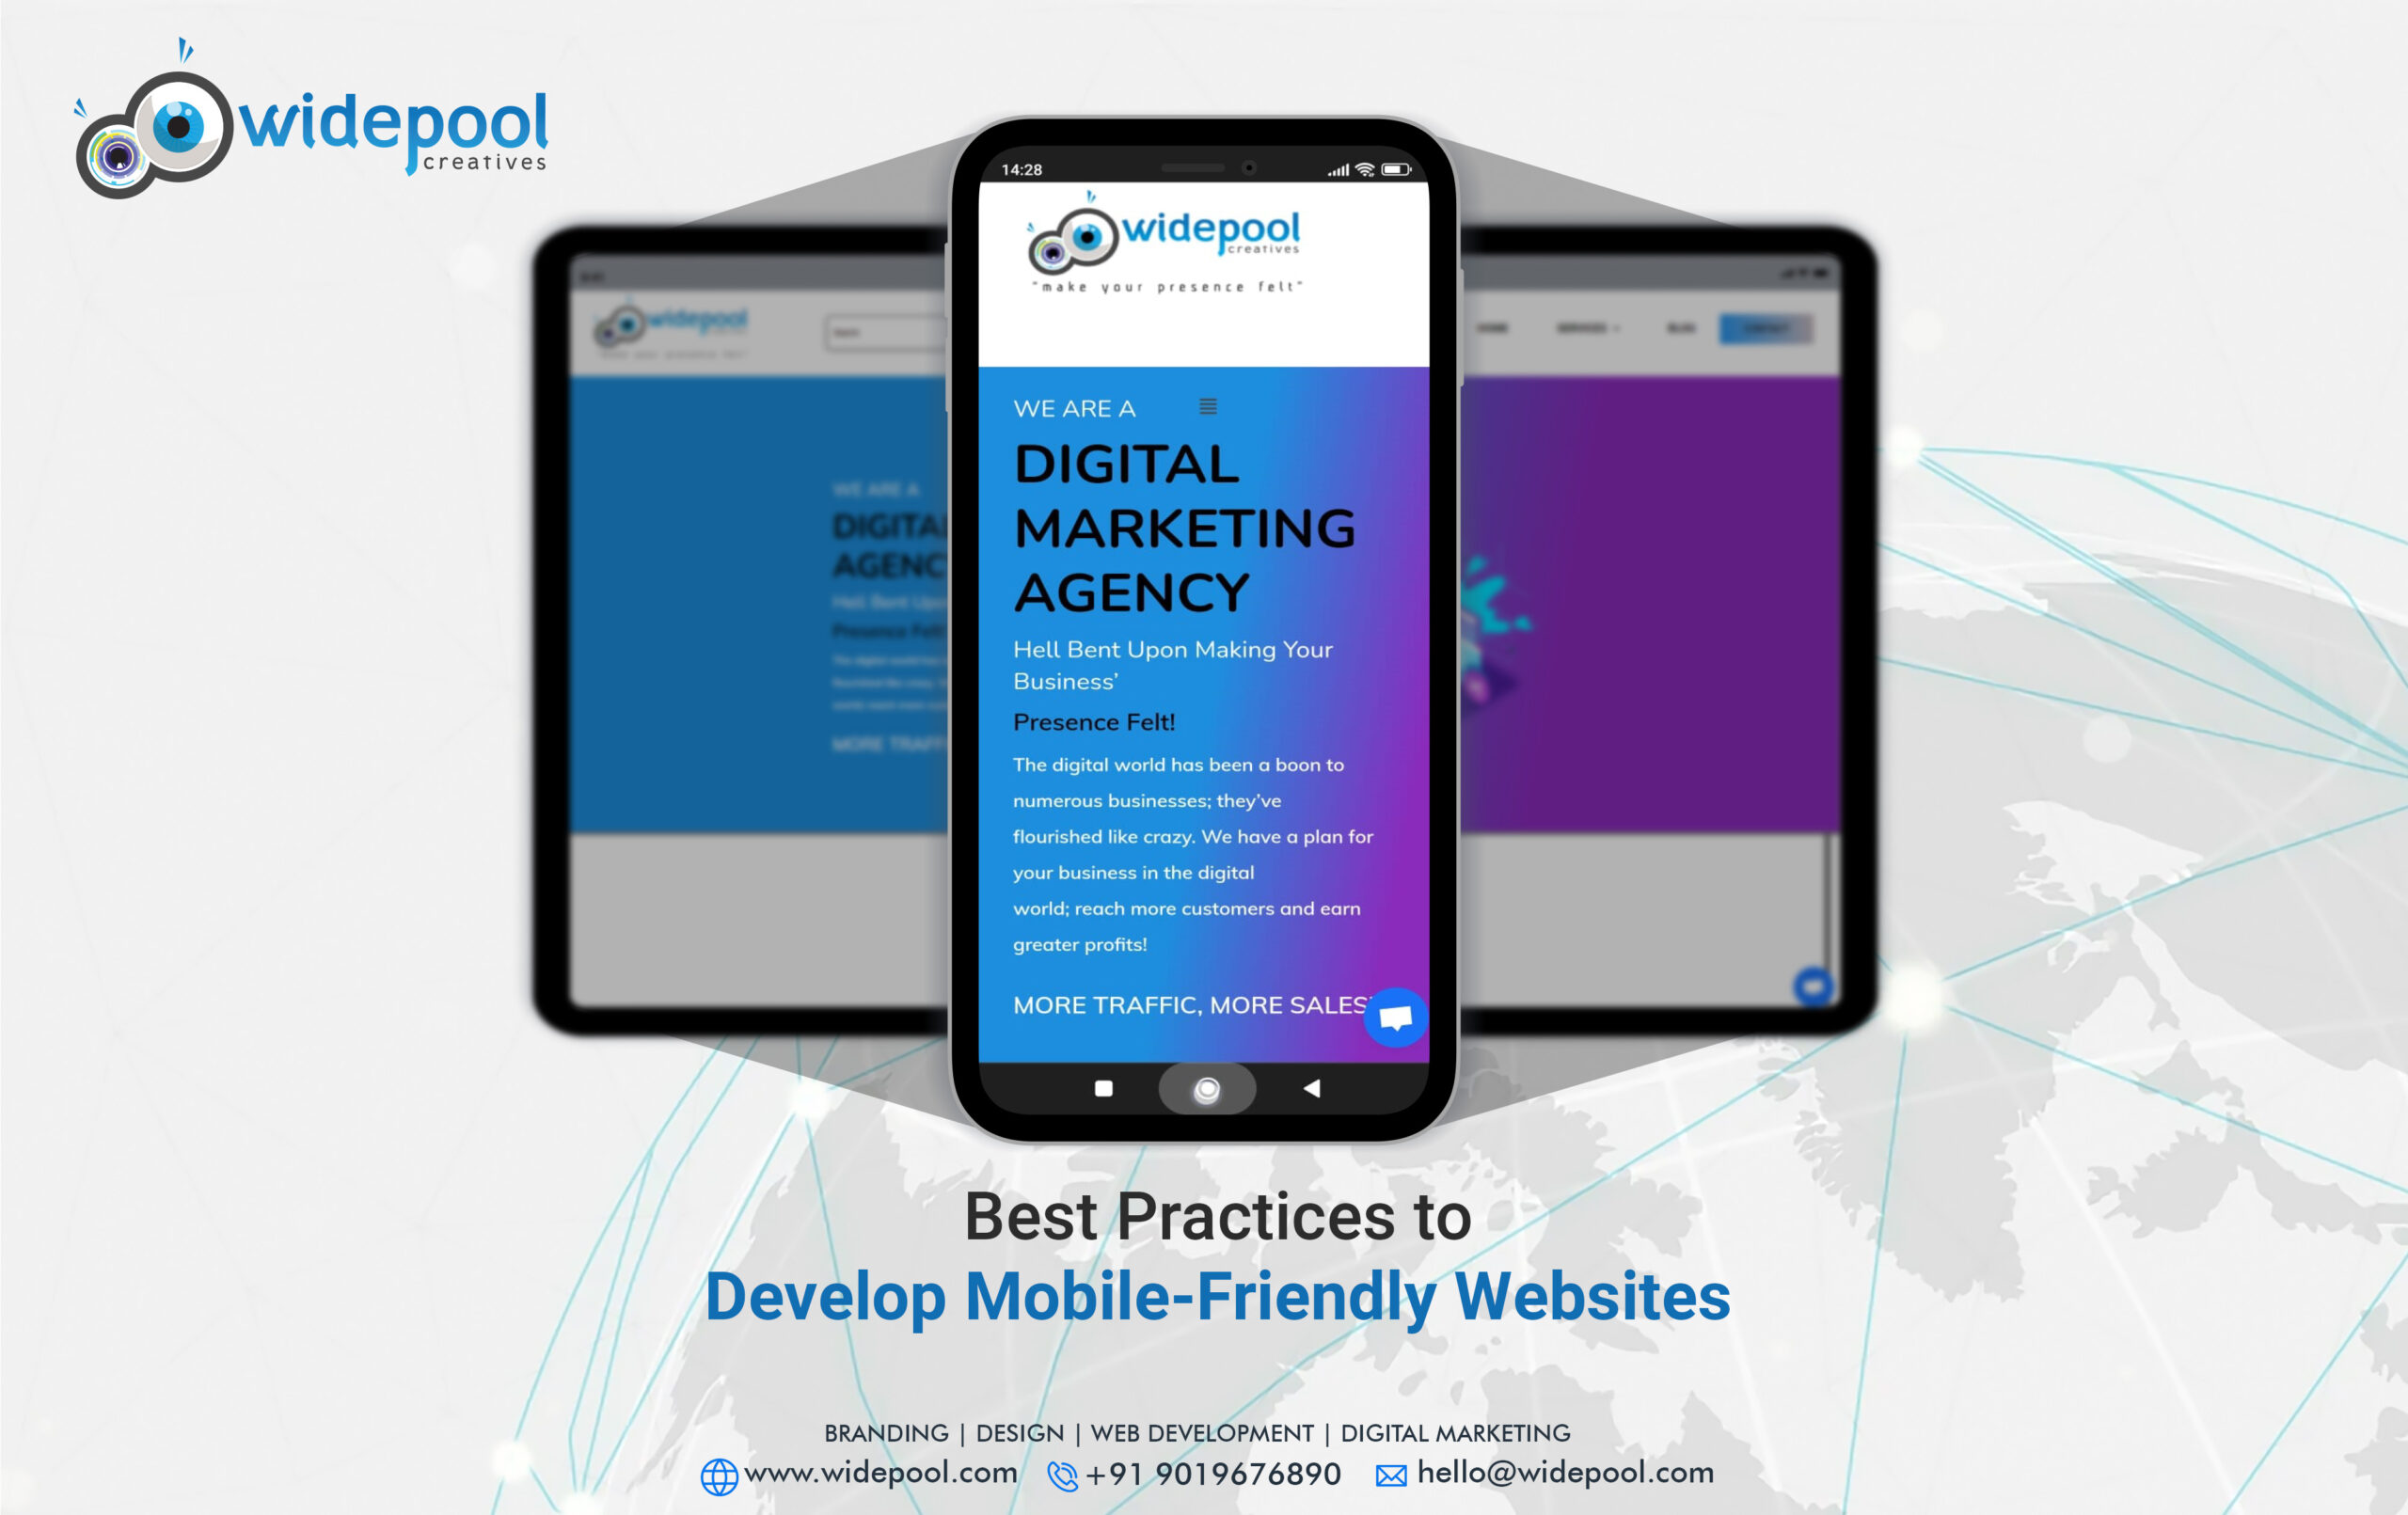 Best Practices to Develop Mobile-Friendly Websites